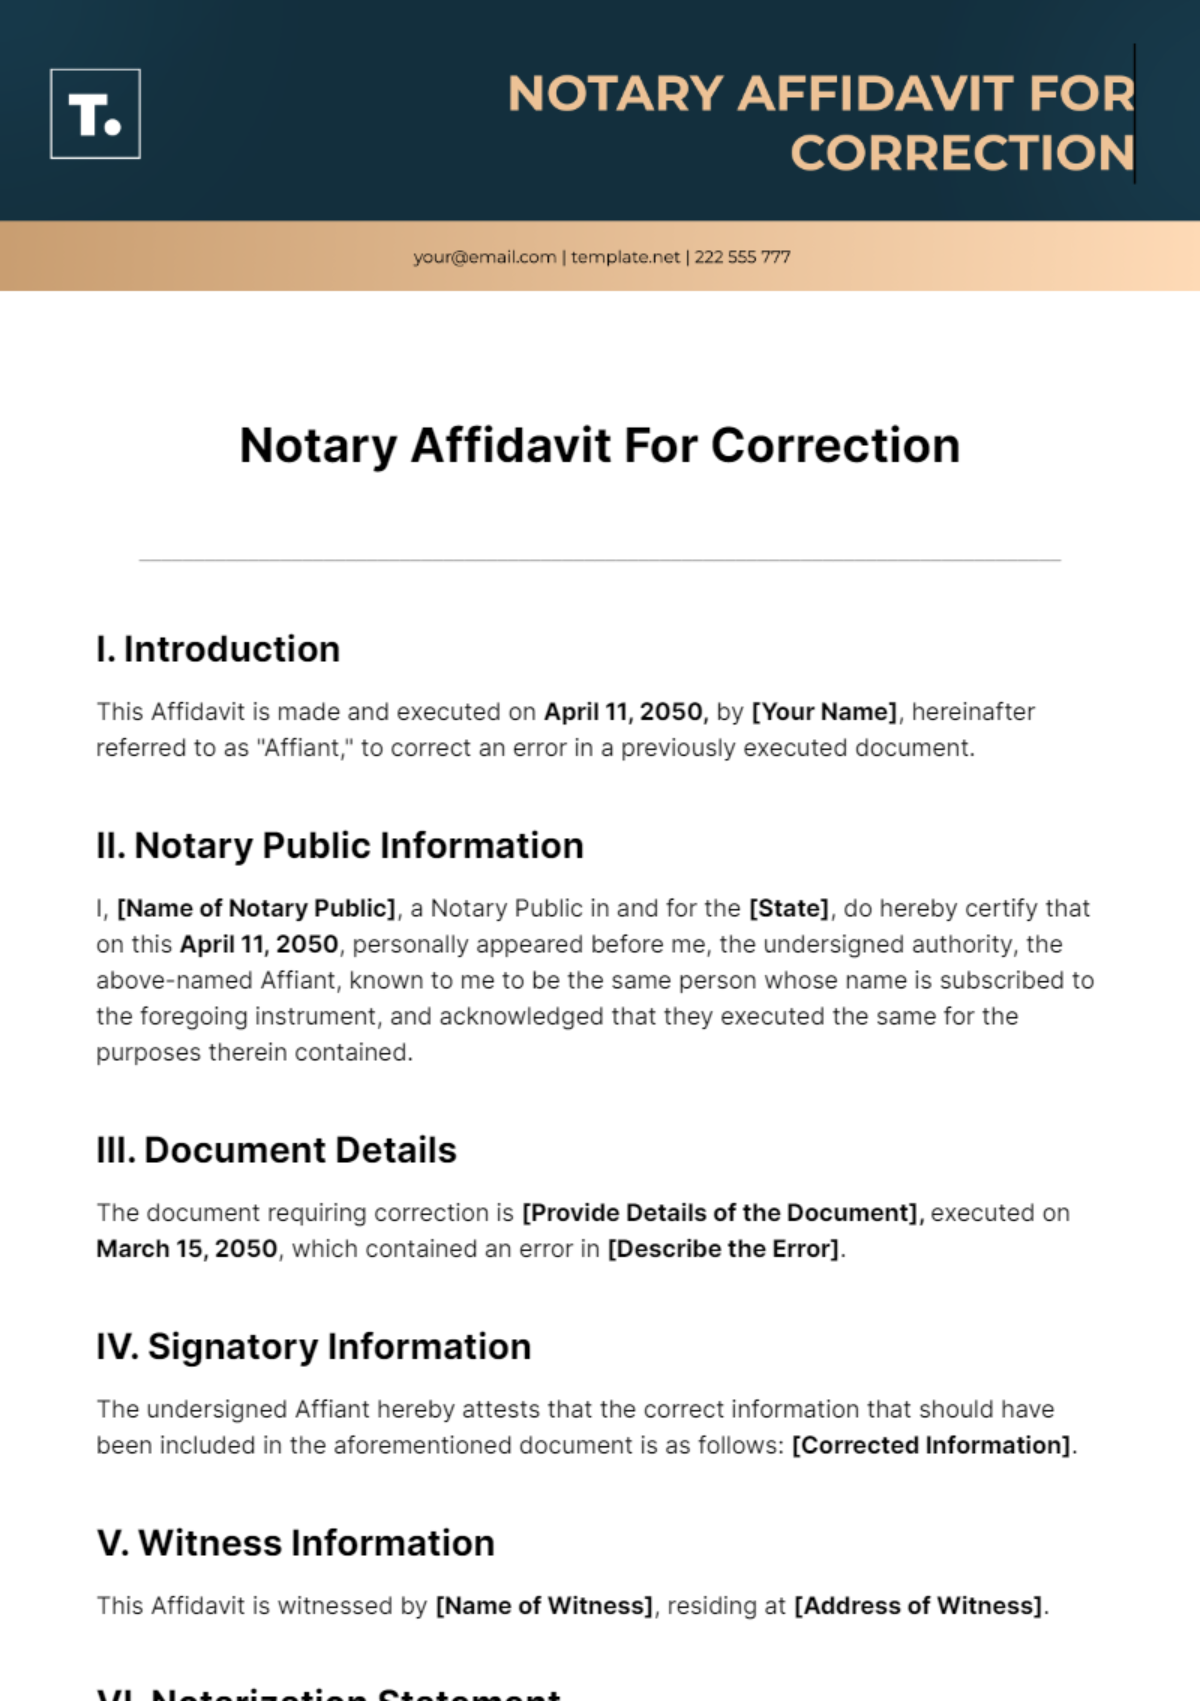 Free Notary Affidavit For Correction Template